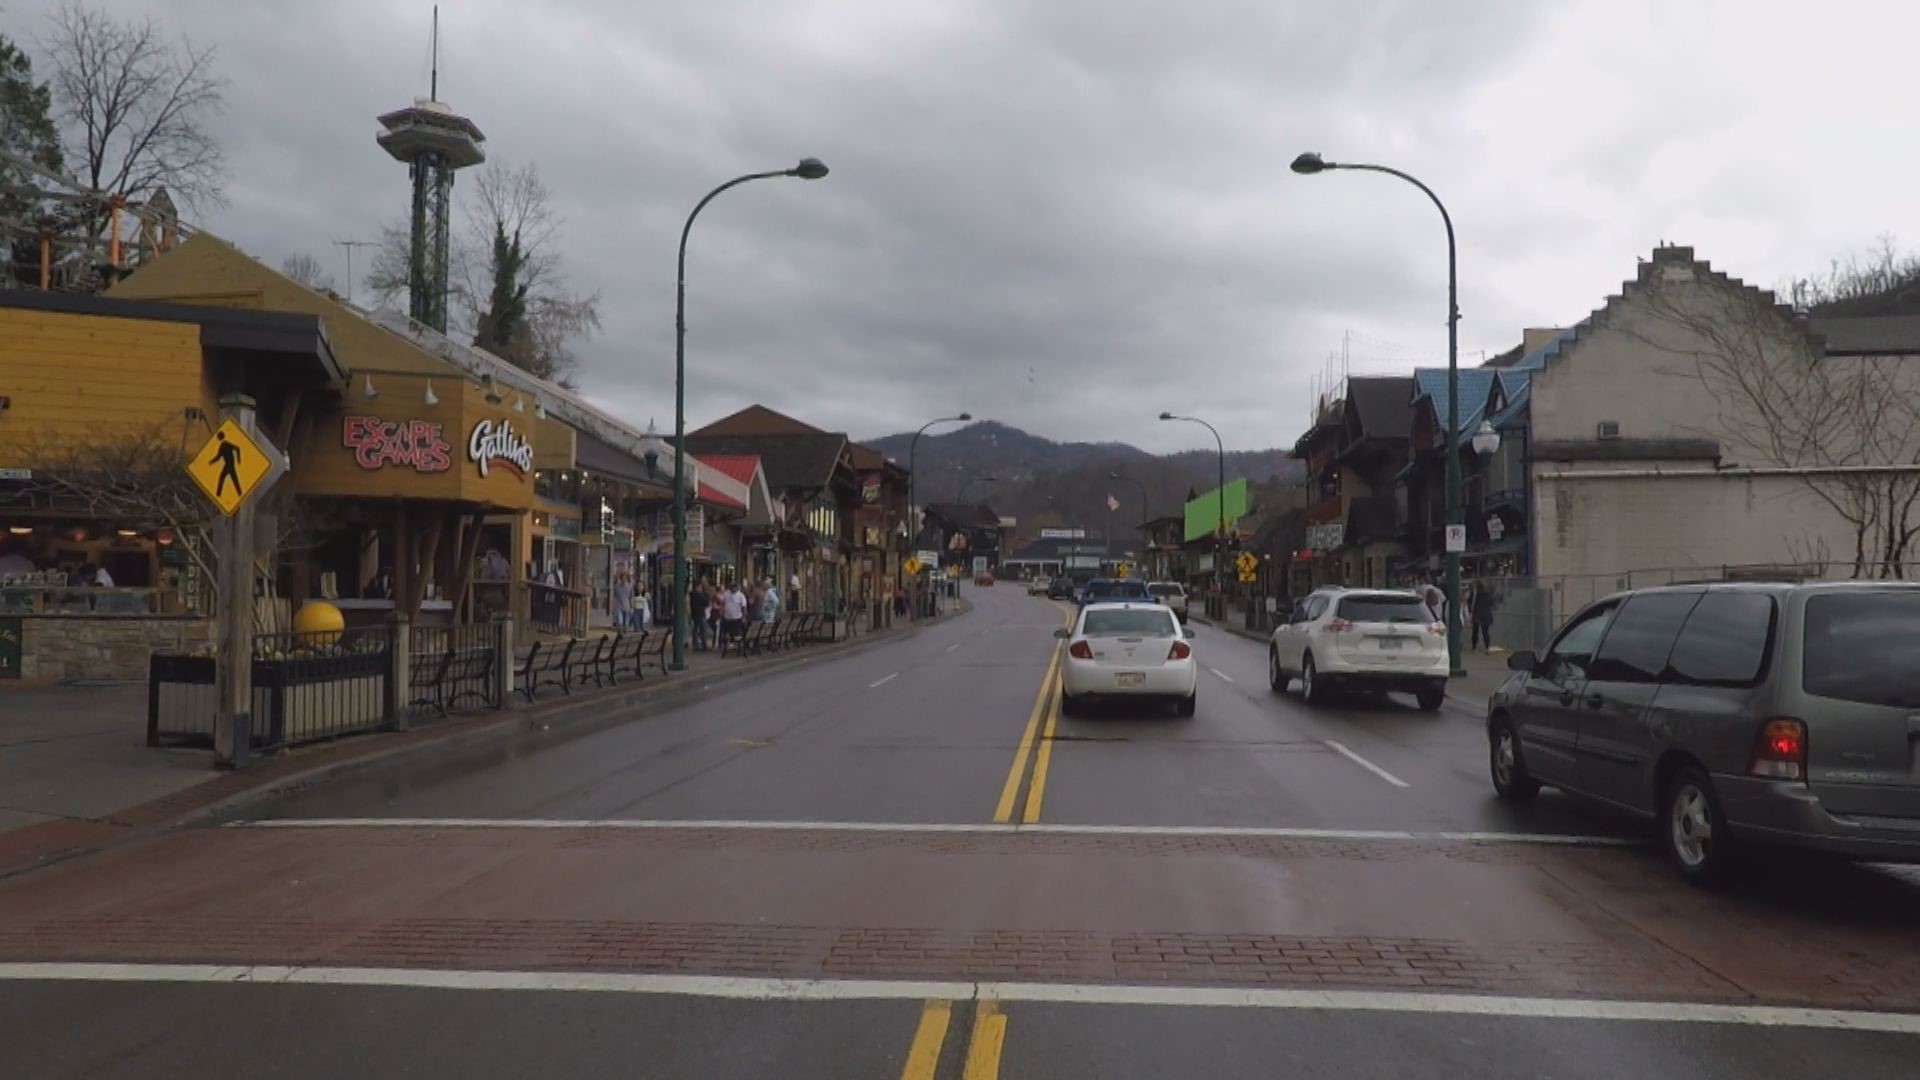 As tourists stream in amid the coronavirus pandemic, Sevier County leaders want changes at restaurants and bars. Gatlinburg residents want more closures.